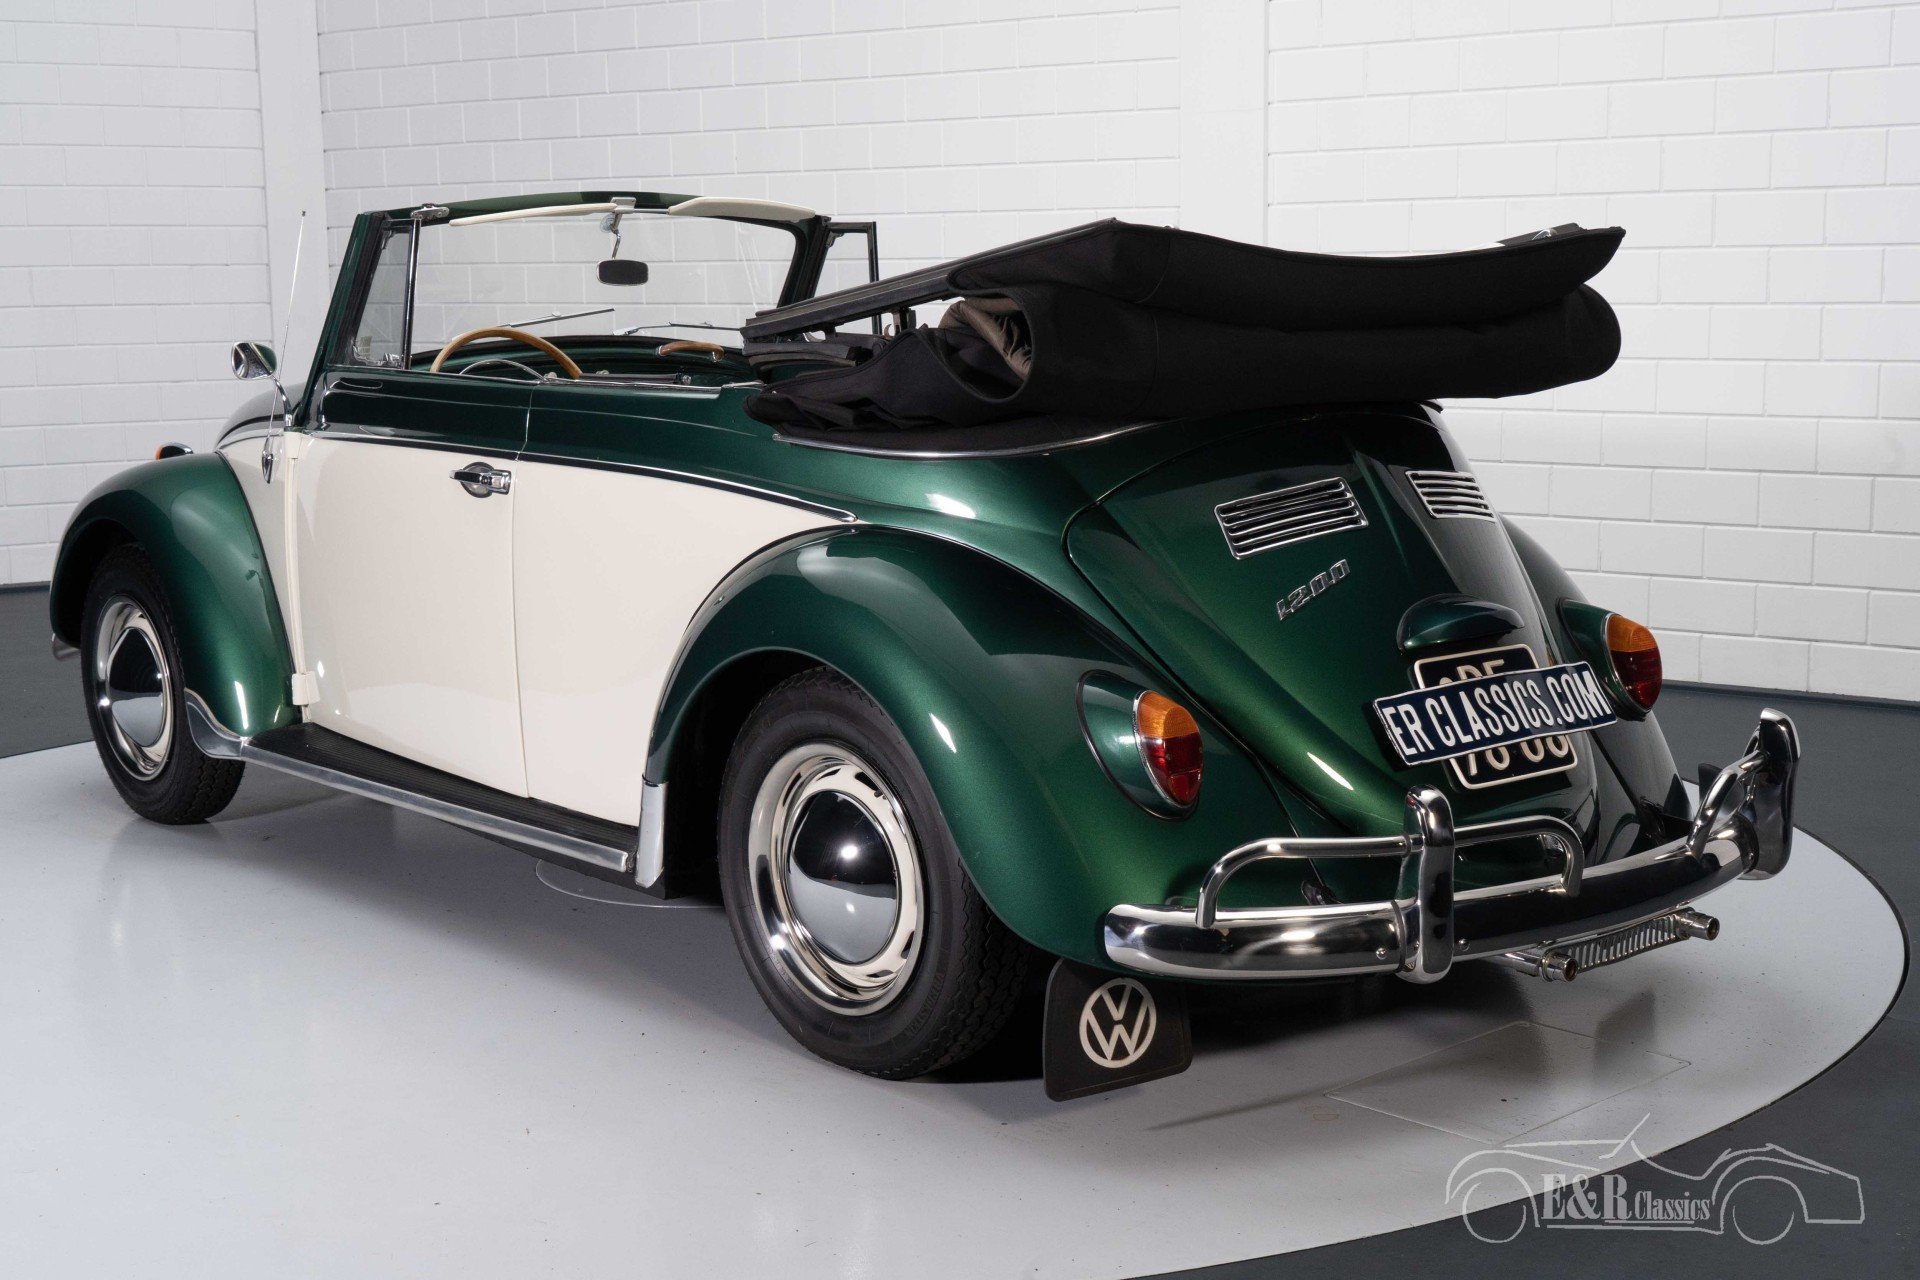 Volkswagen Beetle for sale at ERclassics